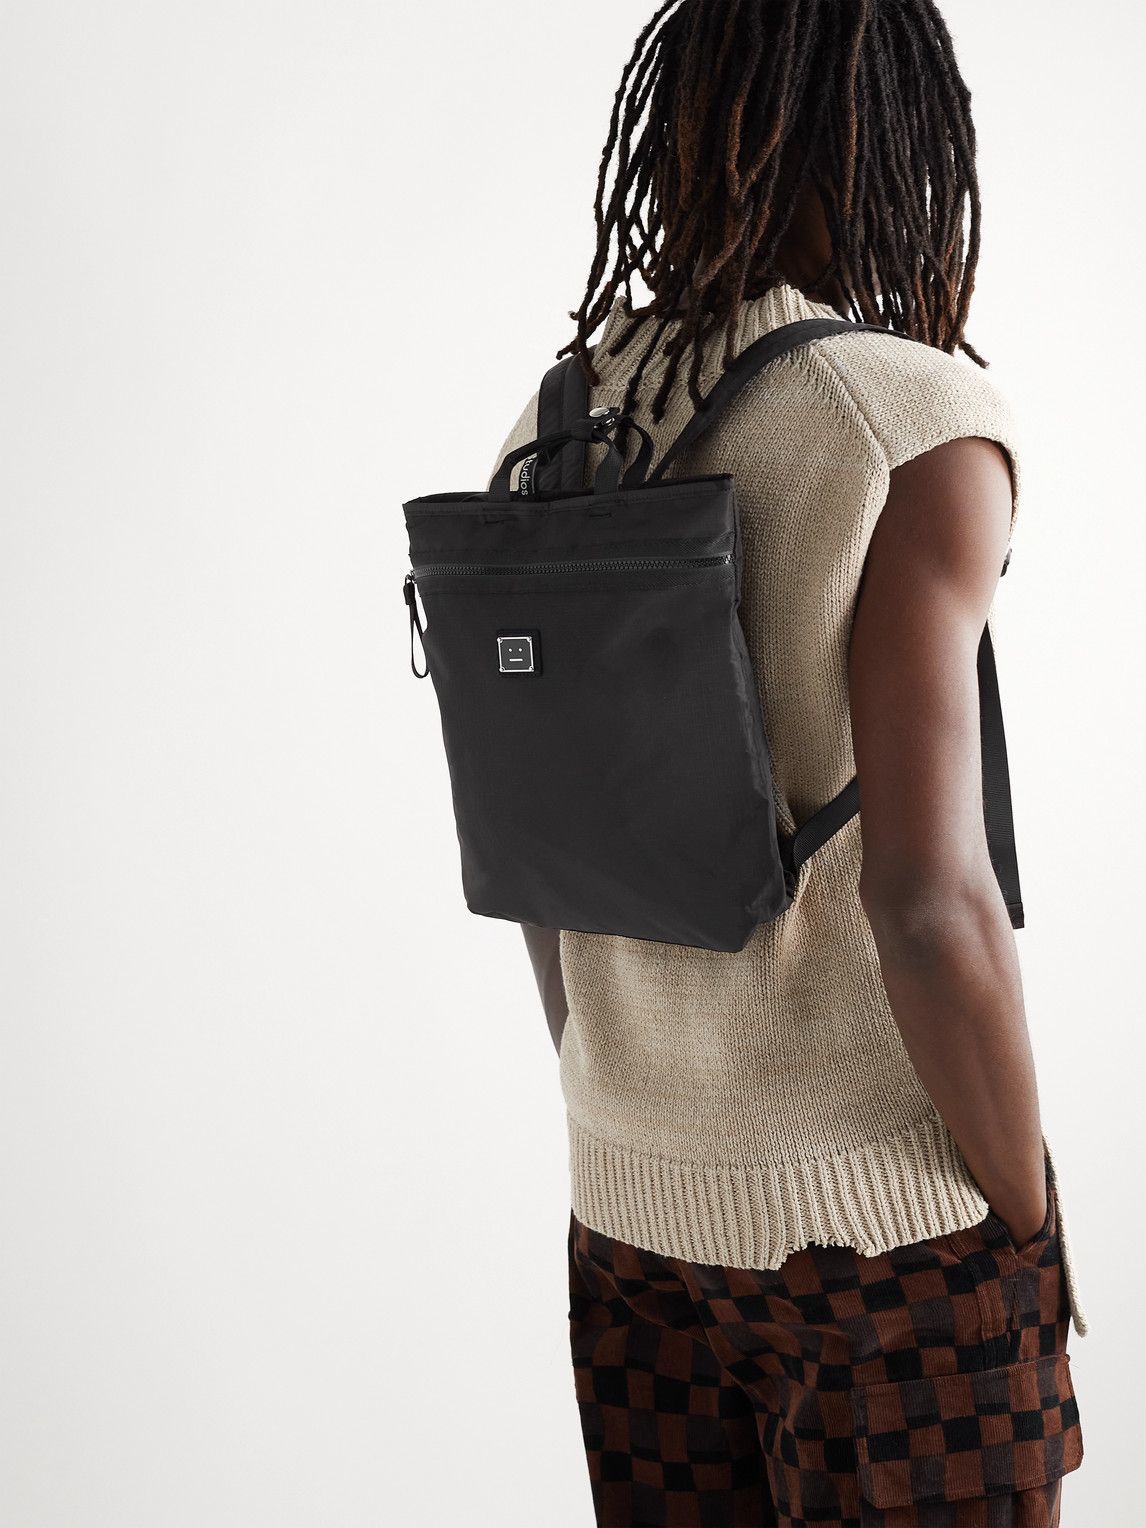 Acne Studios - Recycled Ripstop Backpack Acne Studios